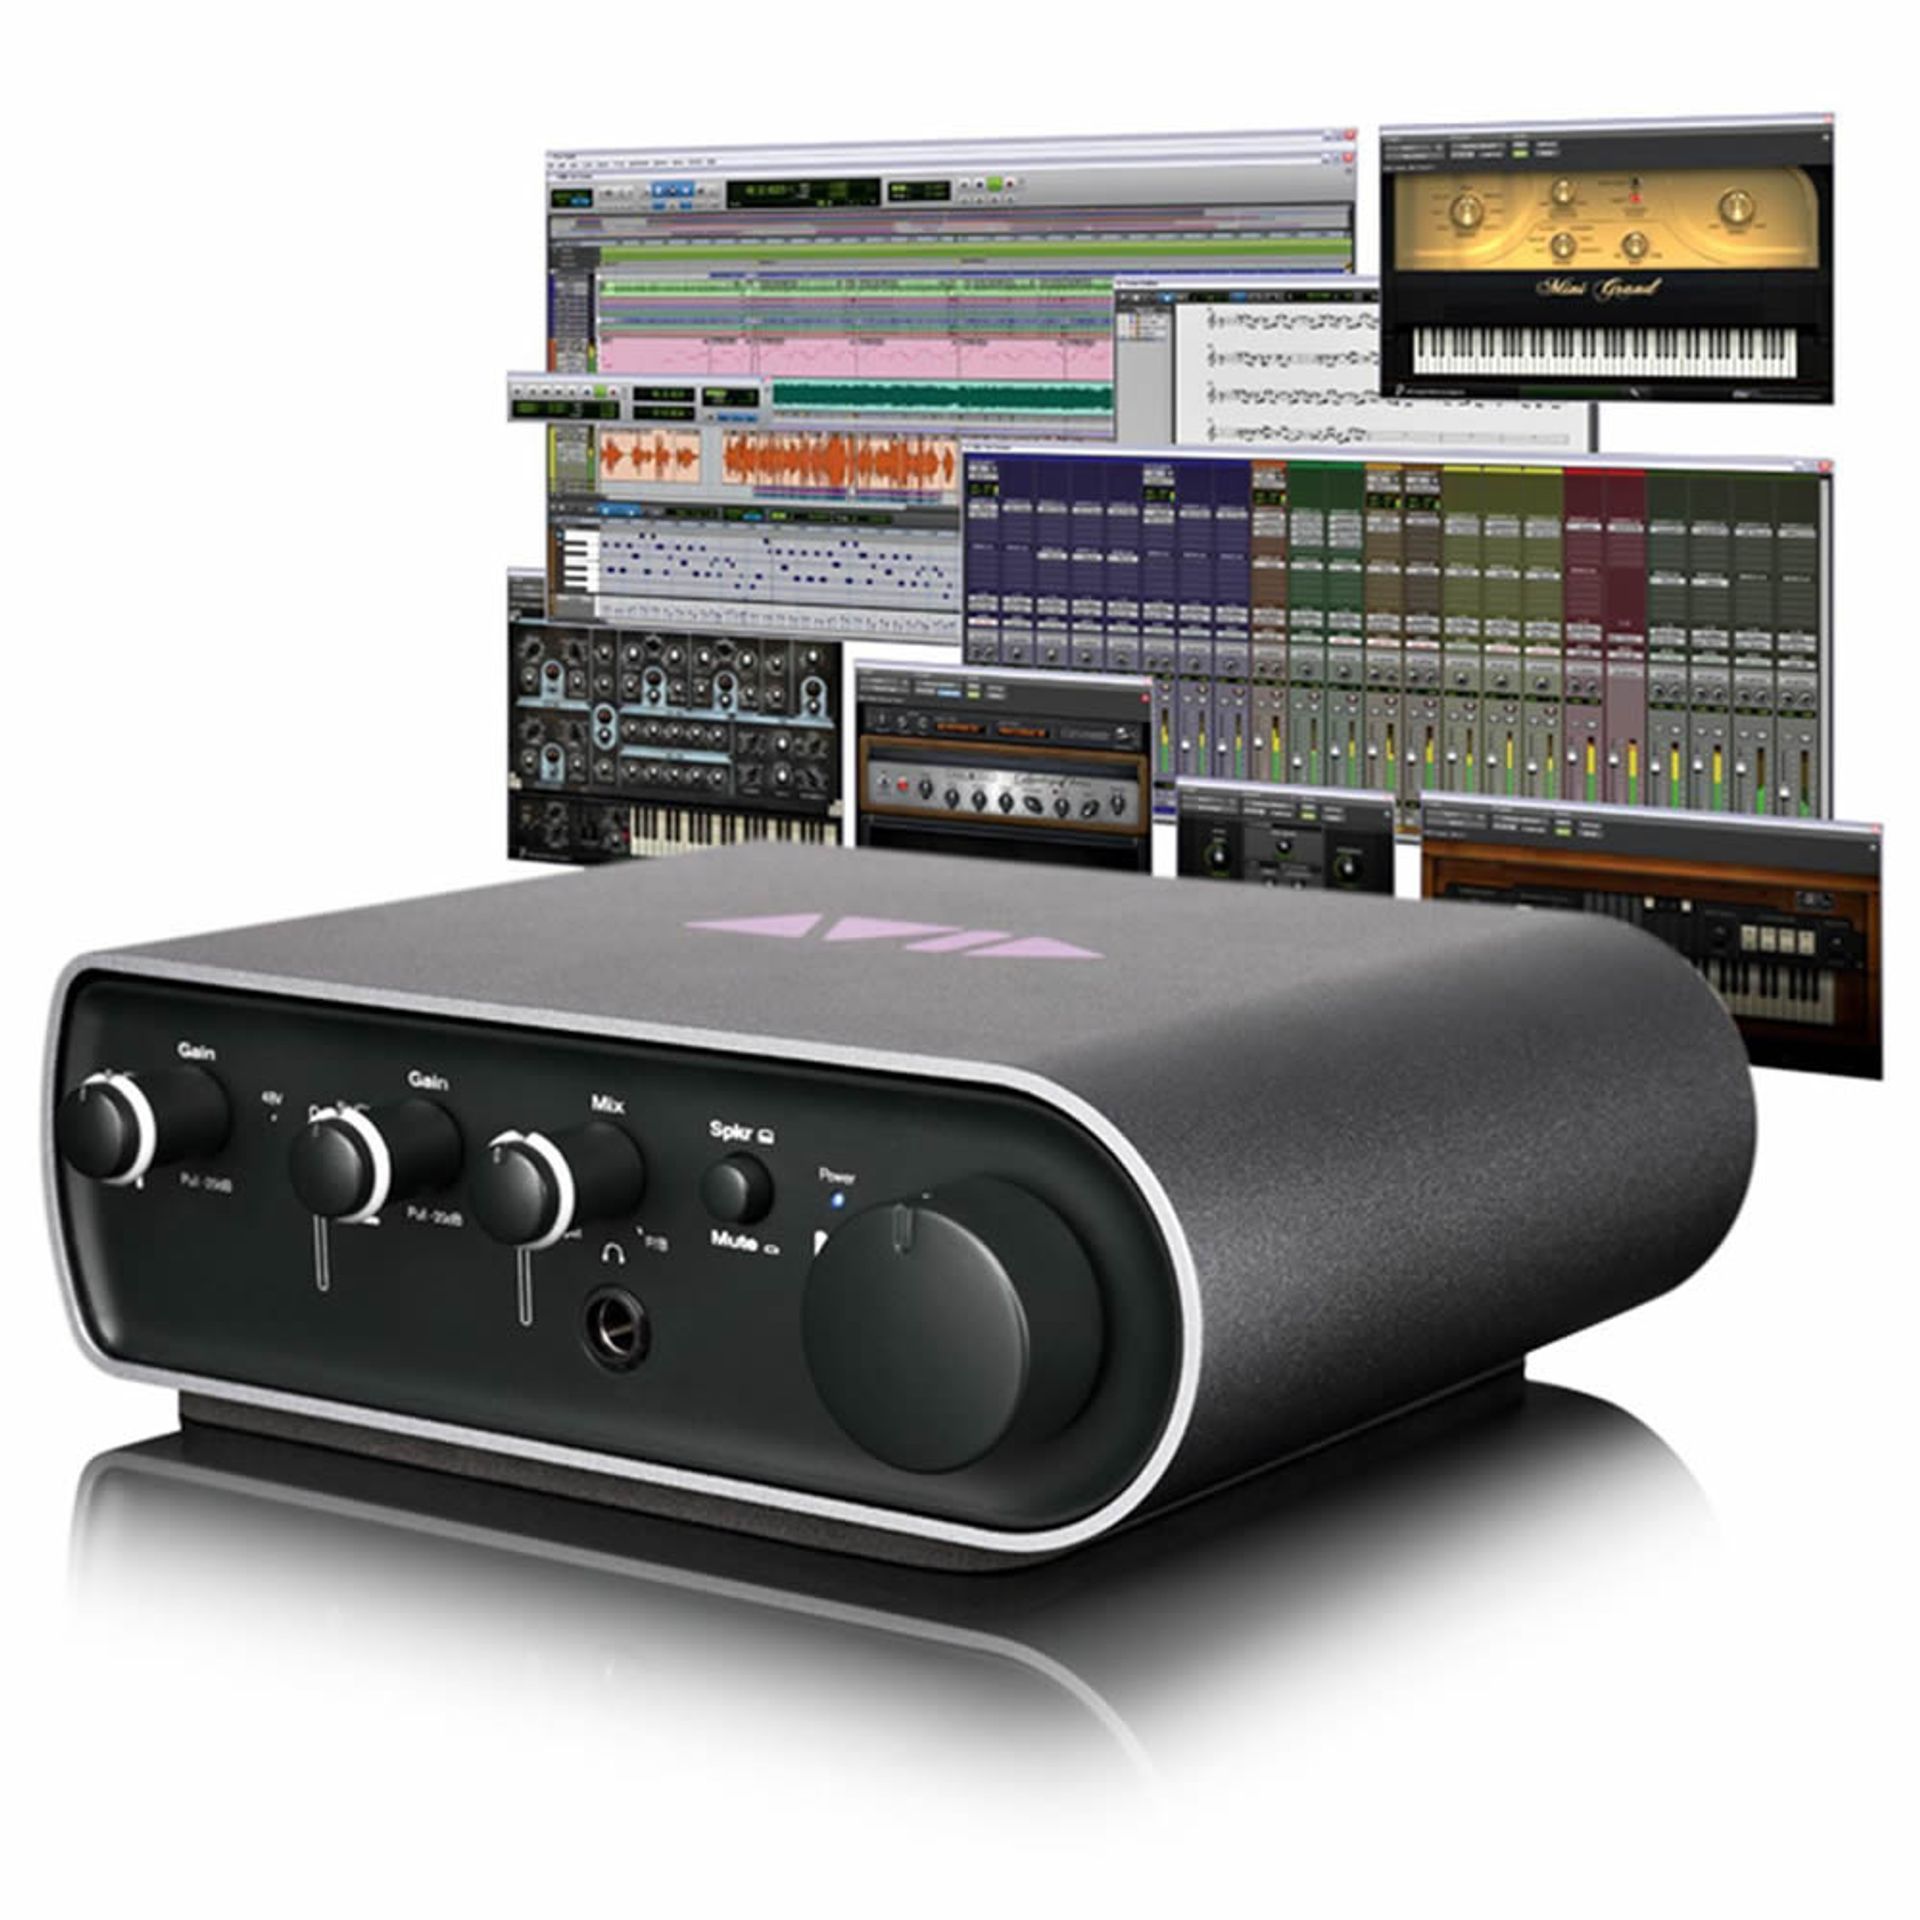 pro tools mbox 2 le8